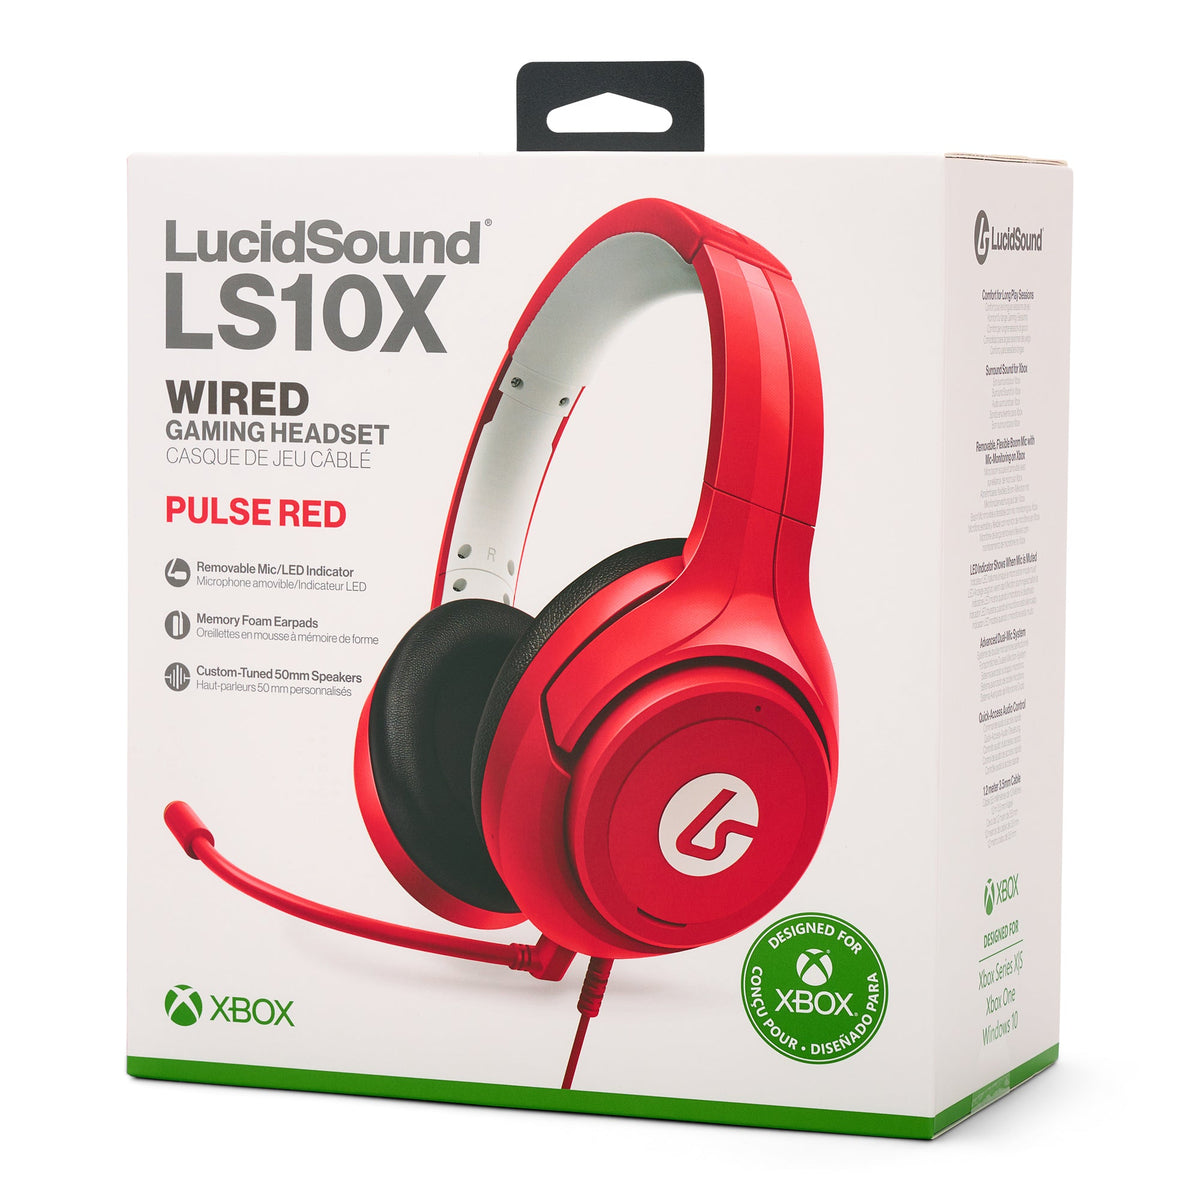 LucidSound LS10X Wired Gaming Headset for Xbox Series X|S - Pulse Red